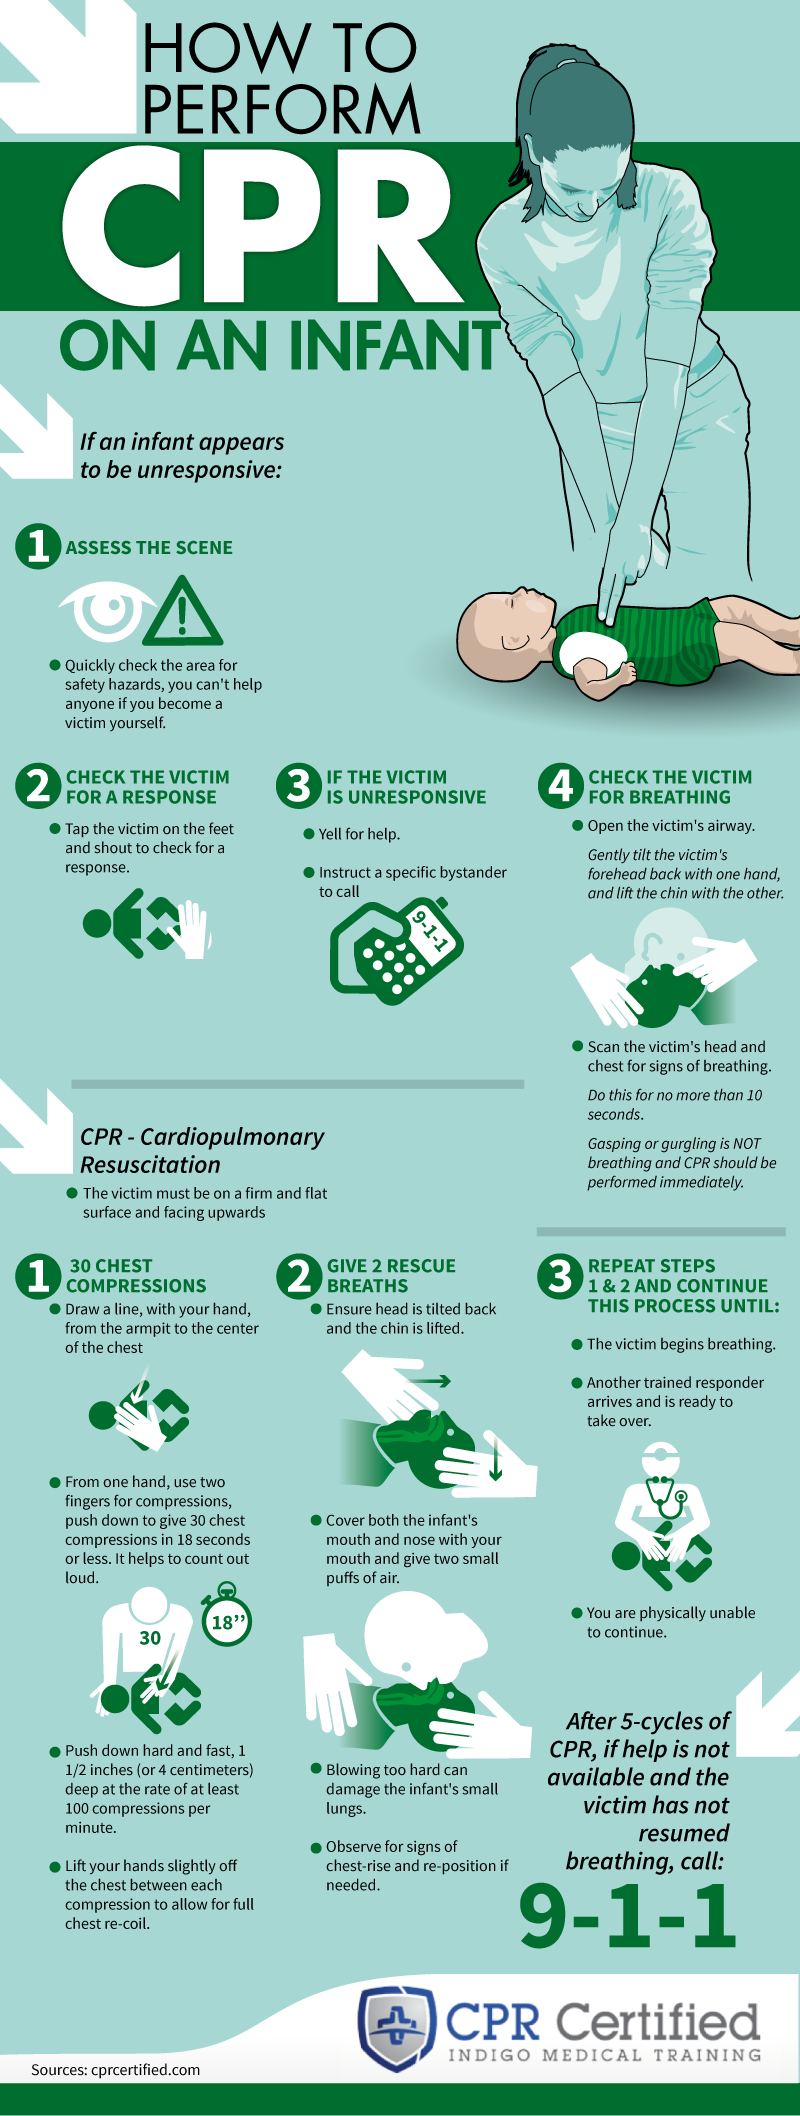 How to Perform CPR on an Infant - Infographic